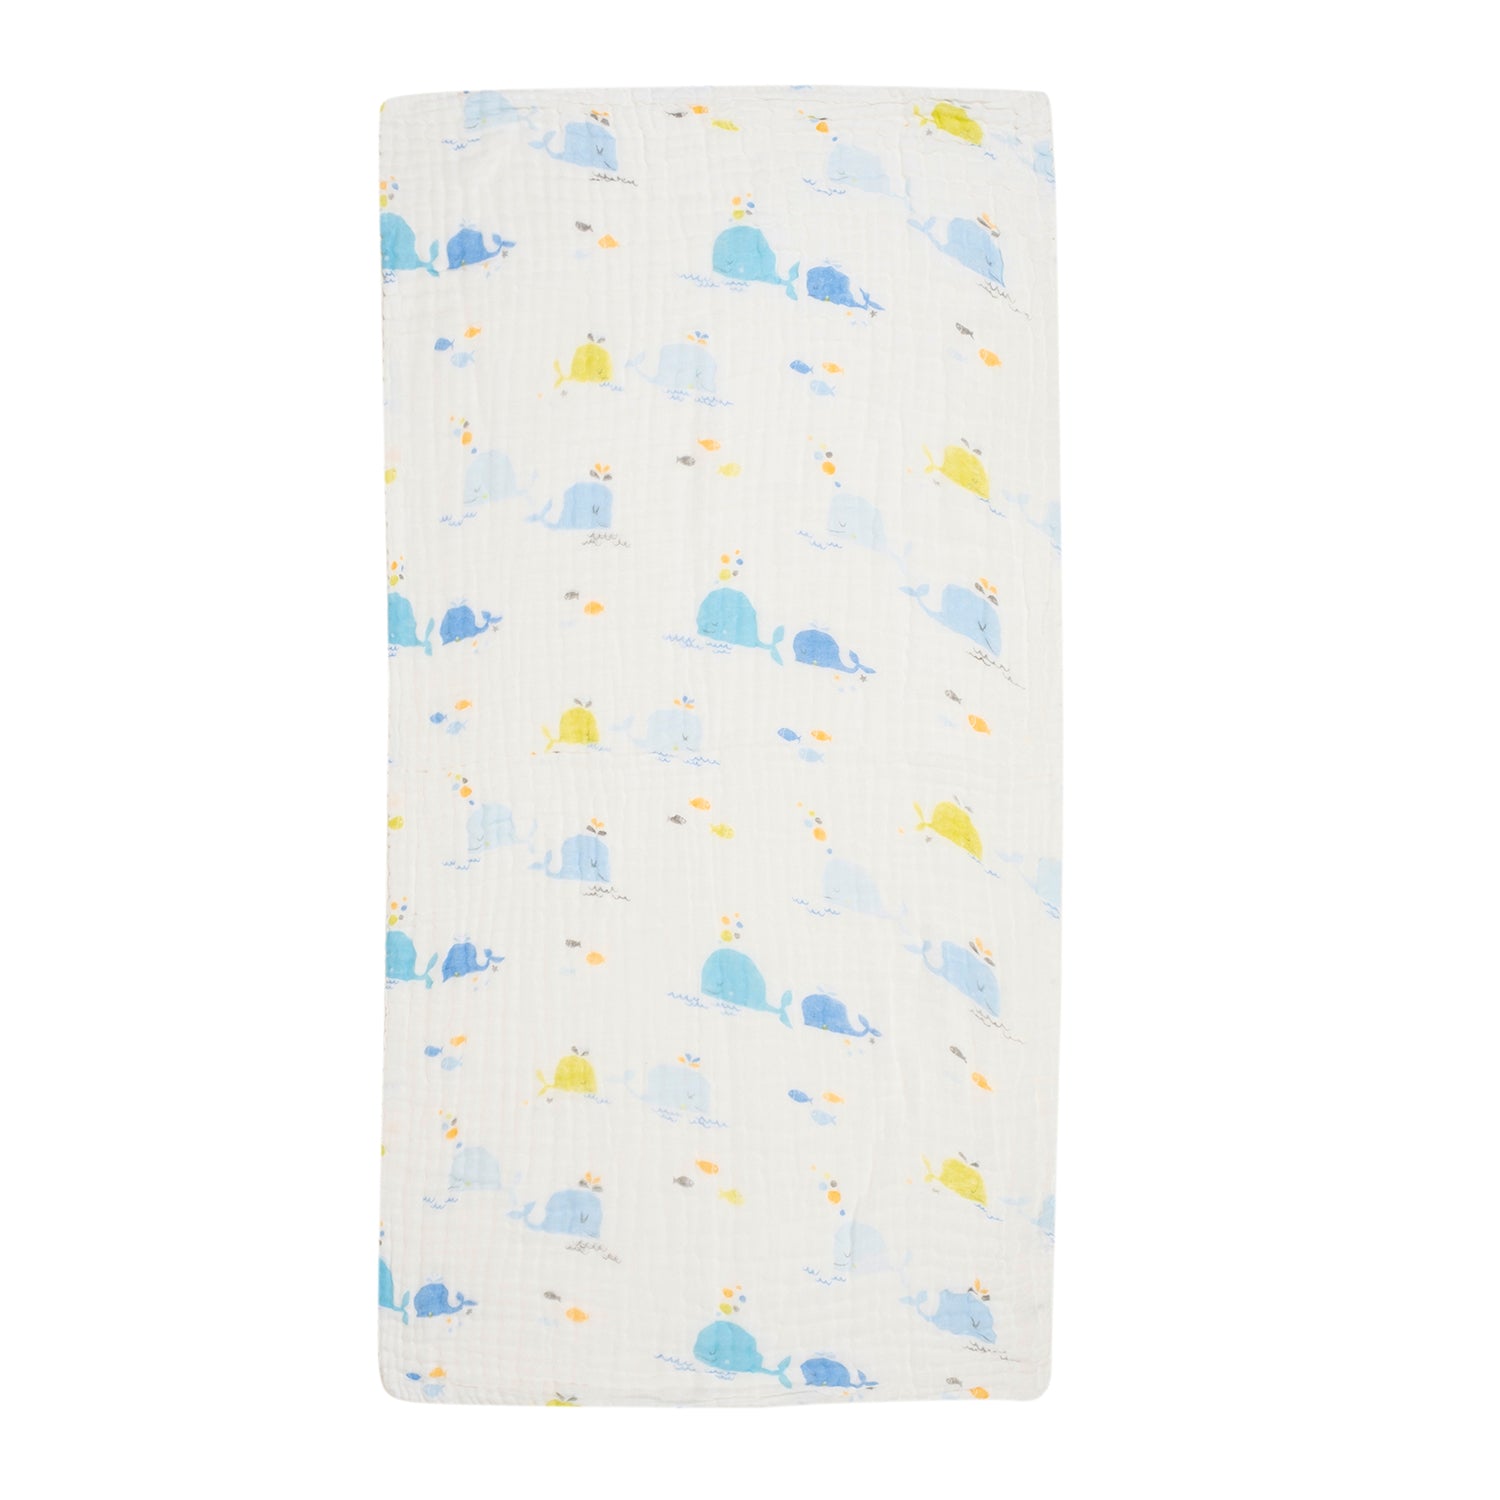 Baby Moo Dolphin 100% Cotton Ultra Soft Eco Friendly Absorbent Towel - White